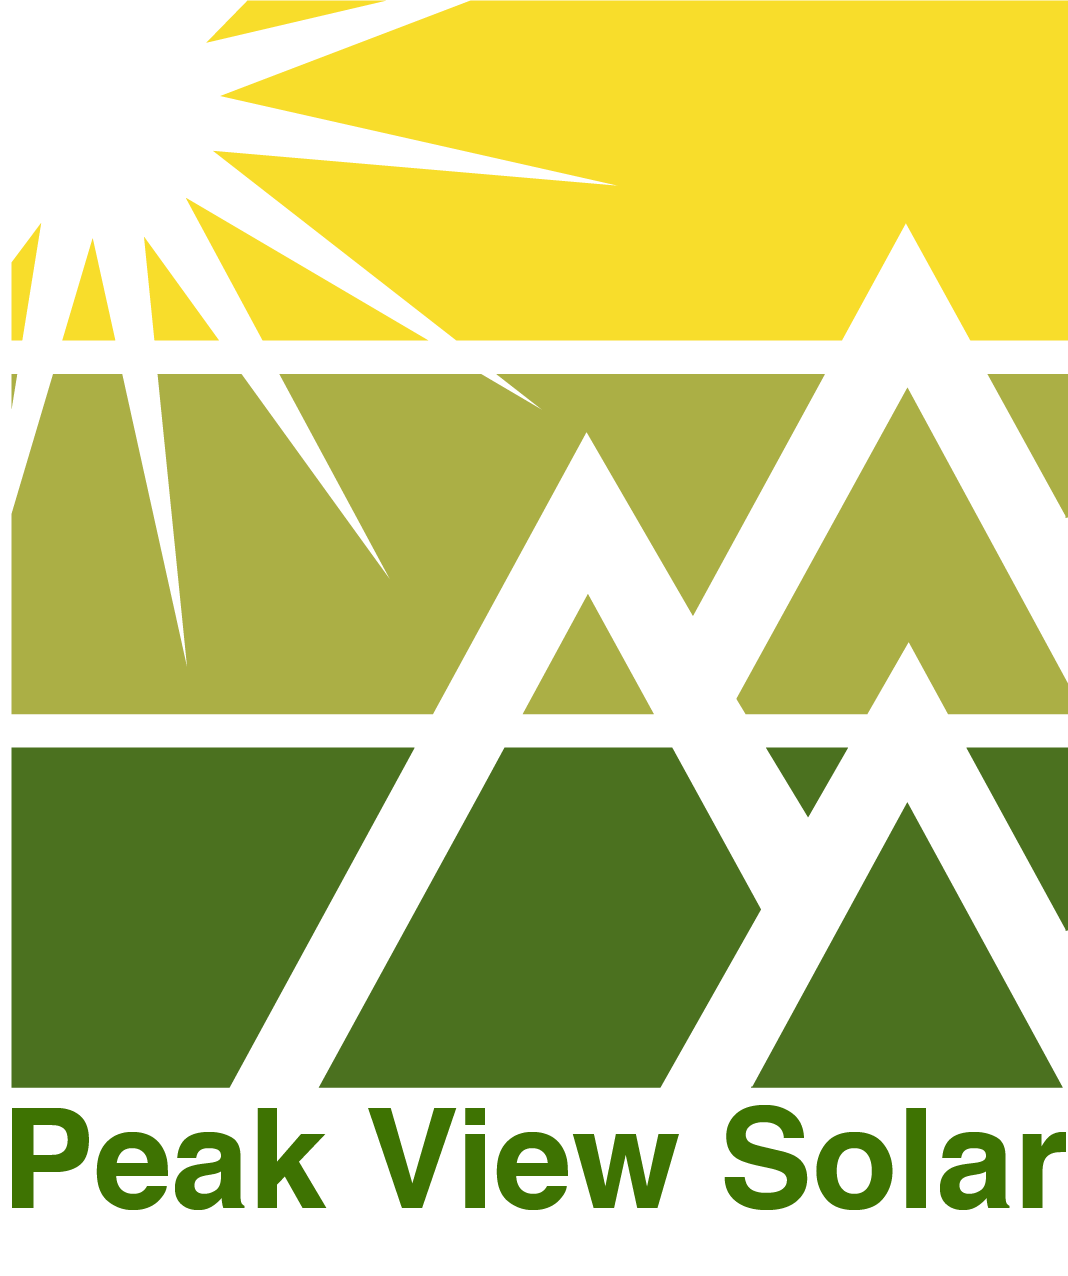 Peak View Solar - Out of Business logo